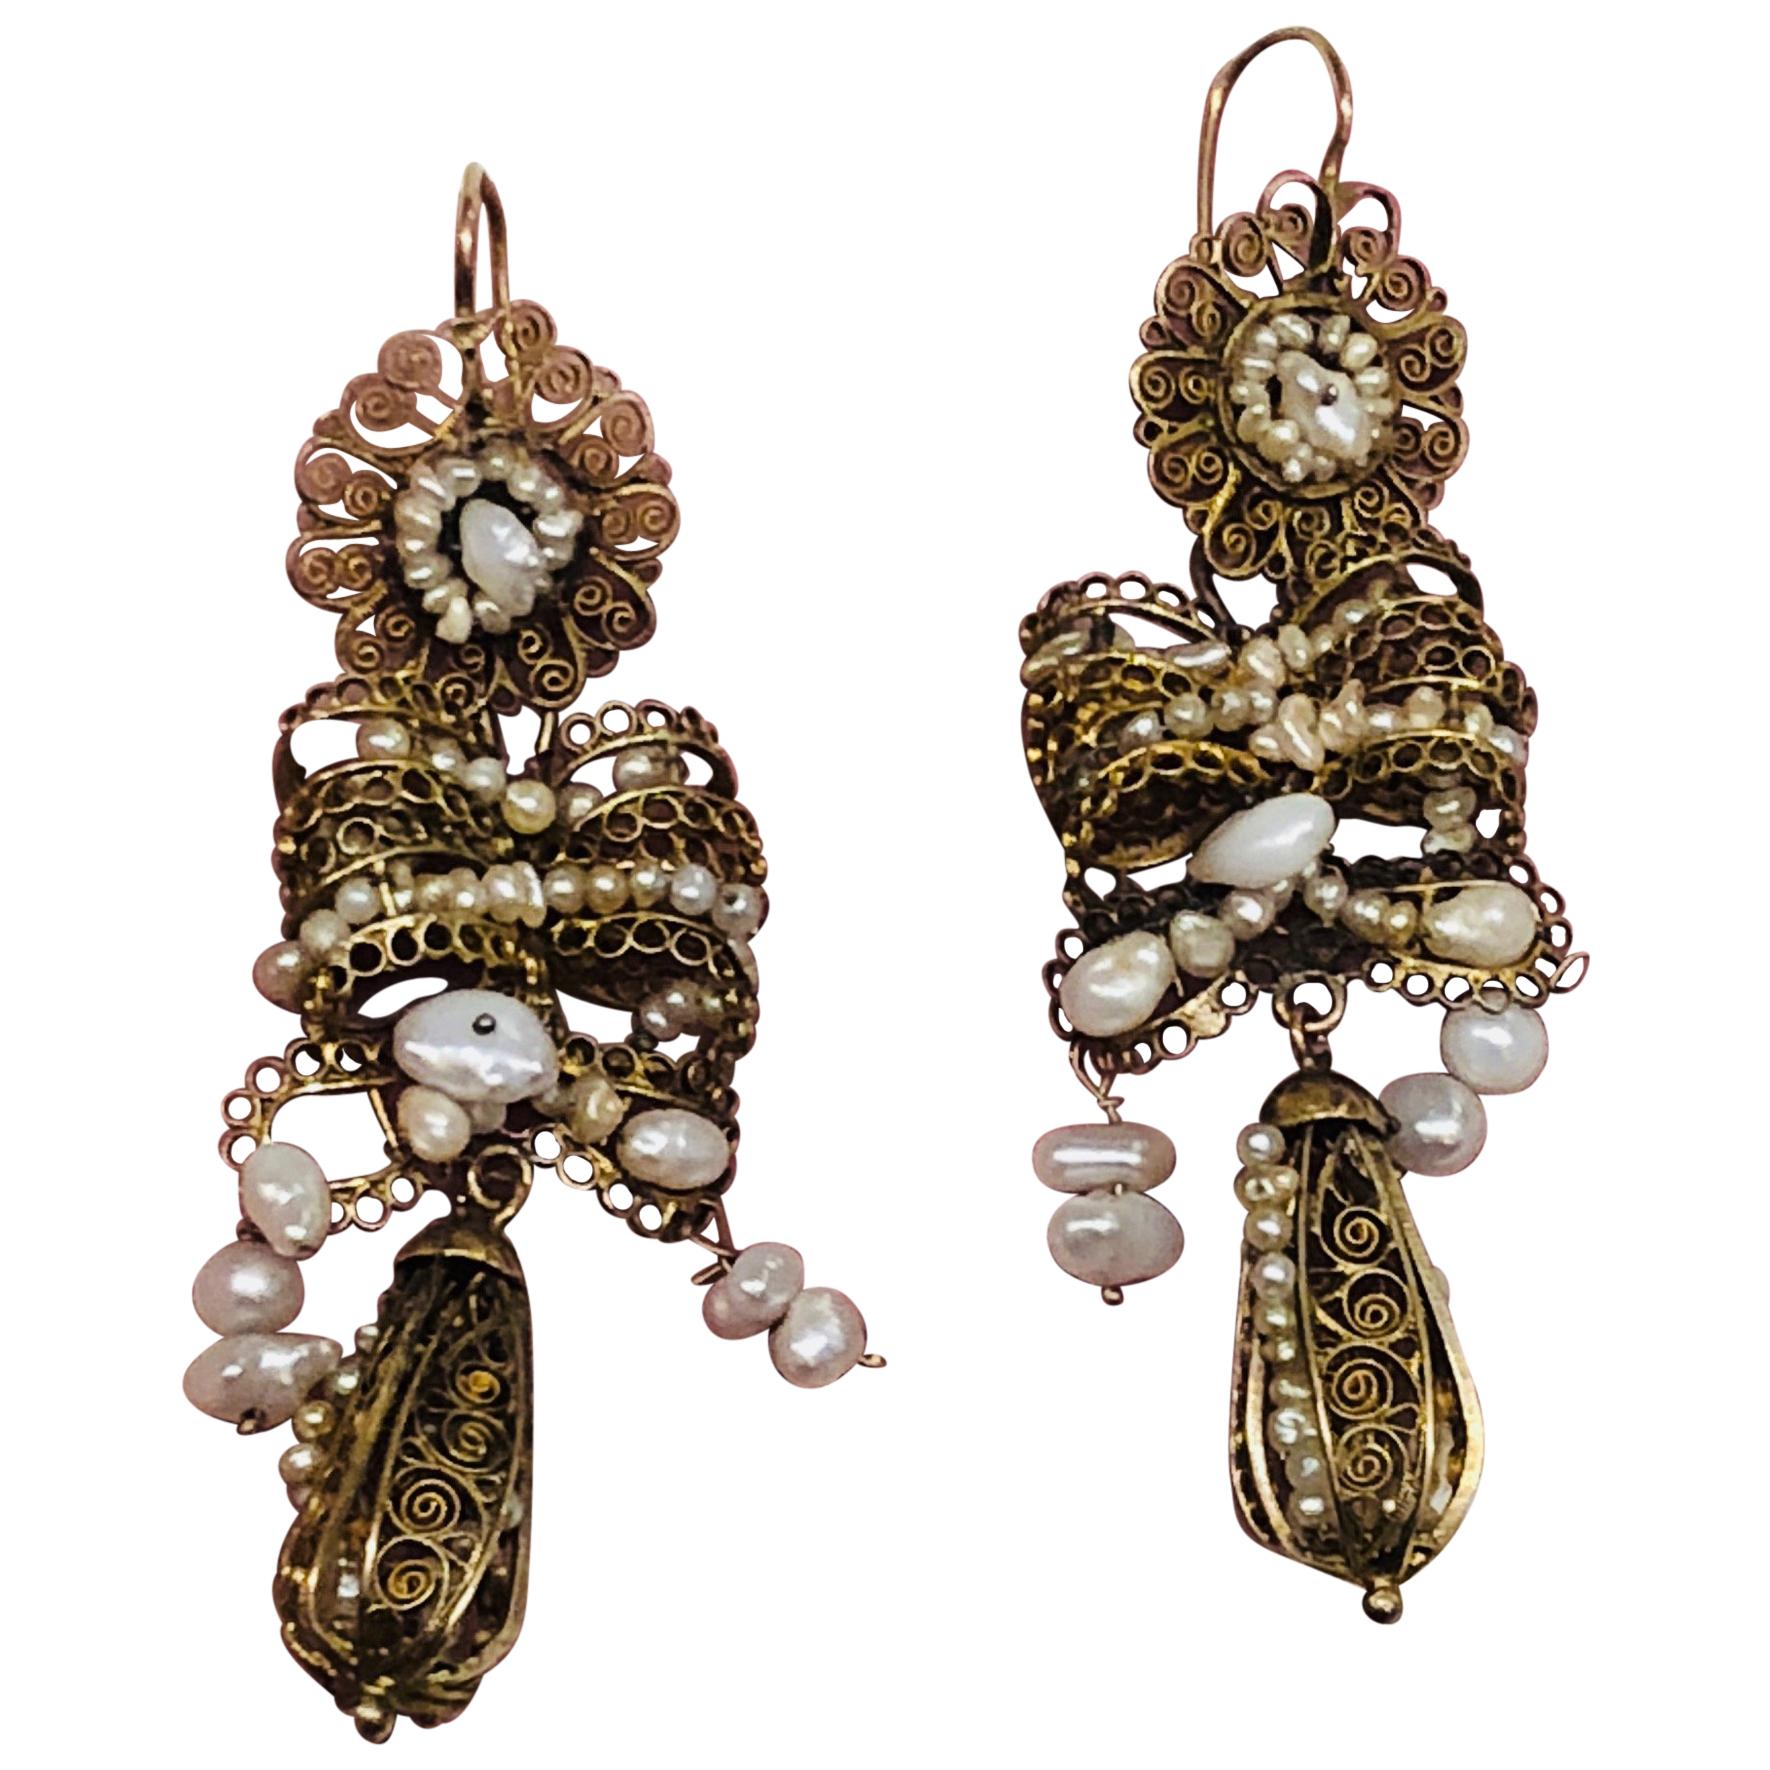 19th Century Spanish Girandolle Filagree Work Earrings Set with Pearls